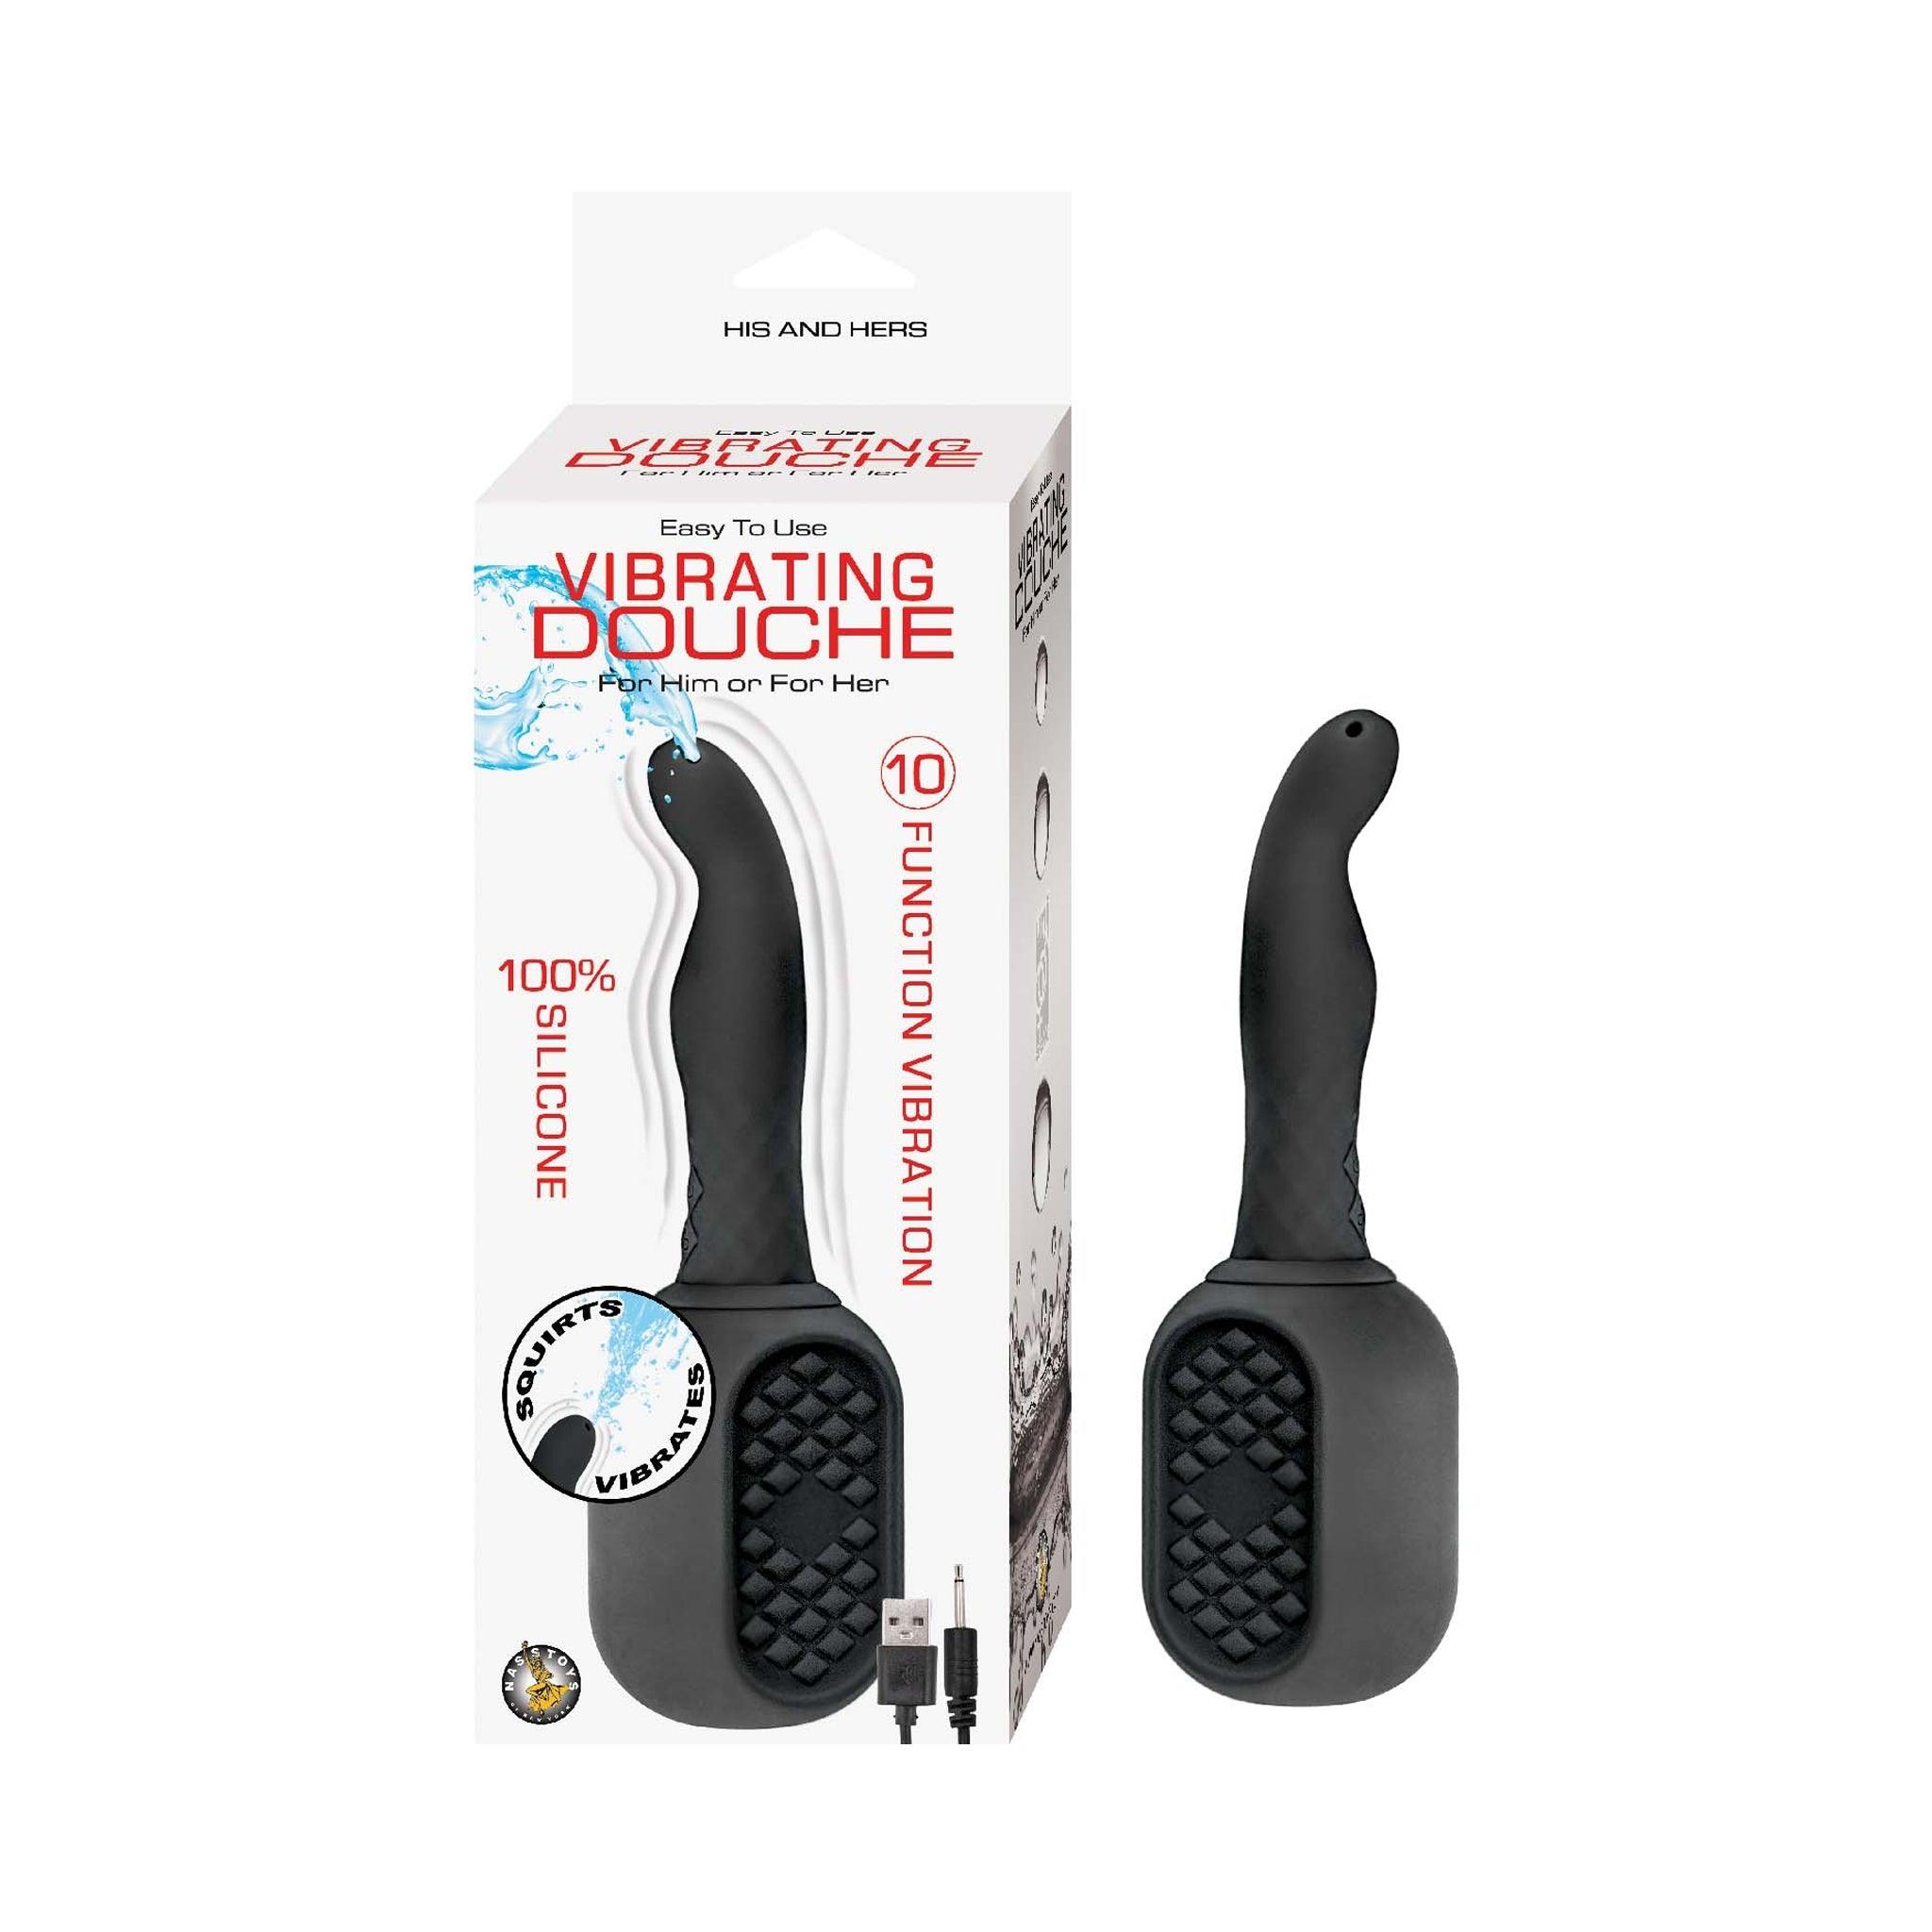 Vibrating Douche for Him or Her - 10 Function - CheapLubes.com